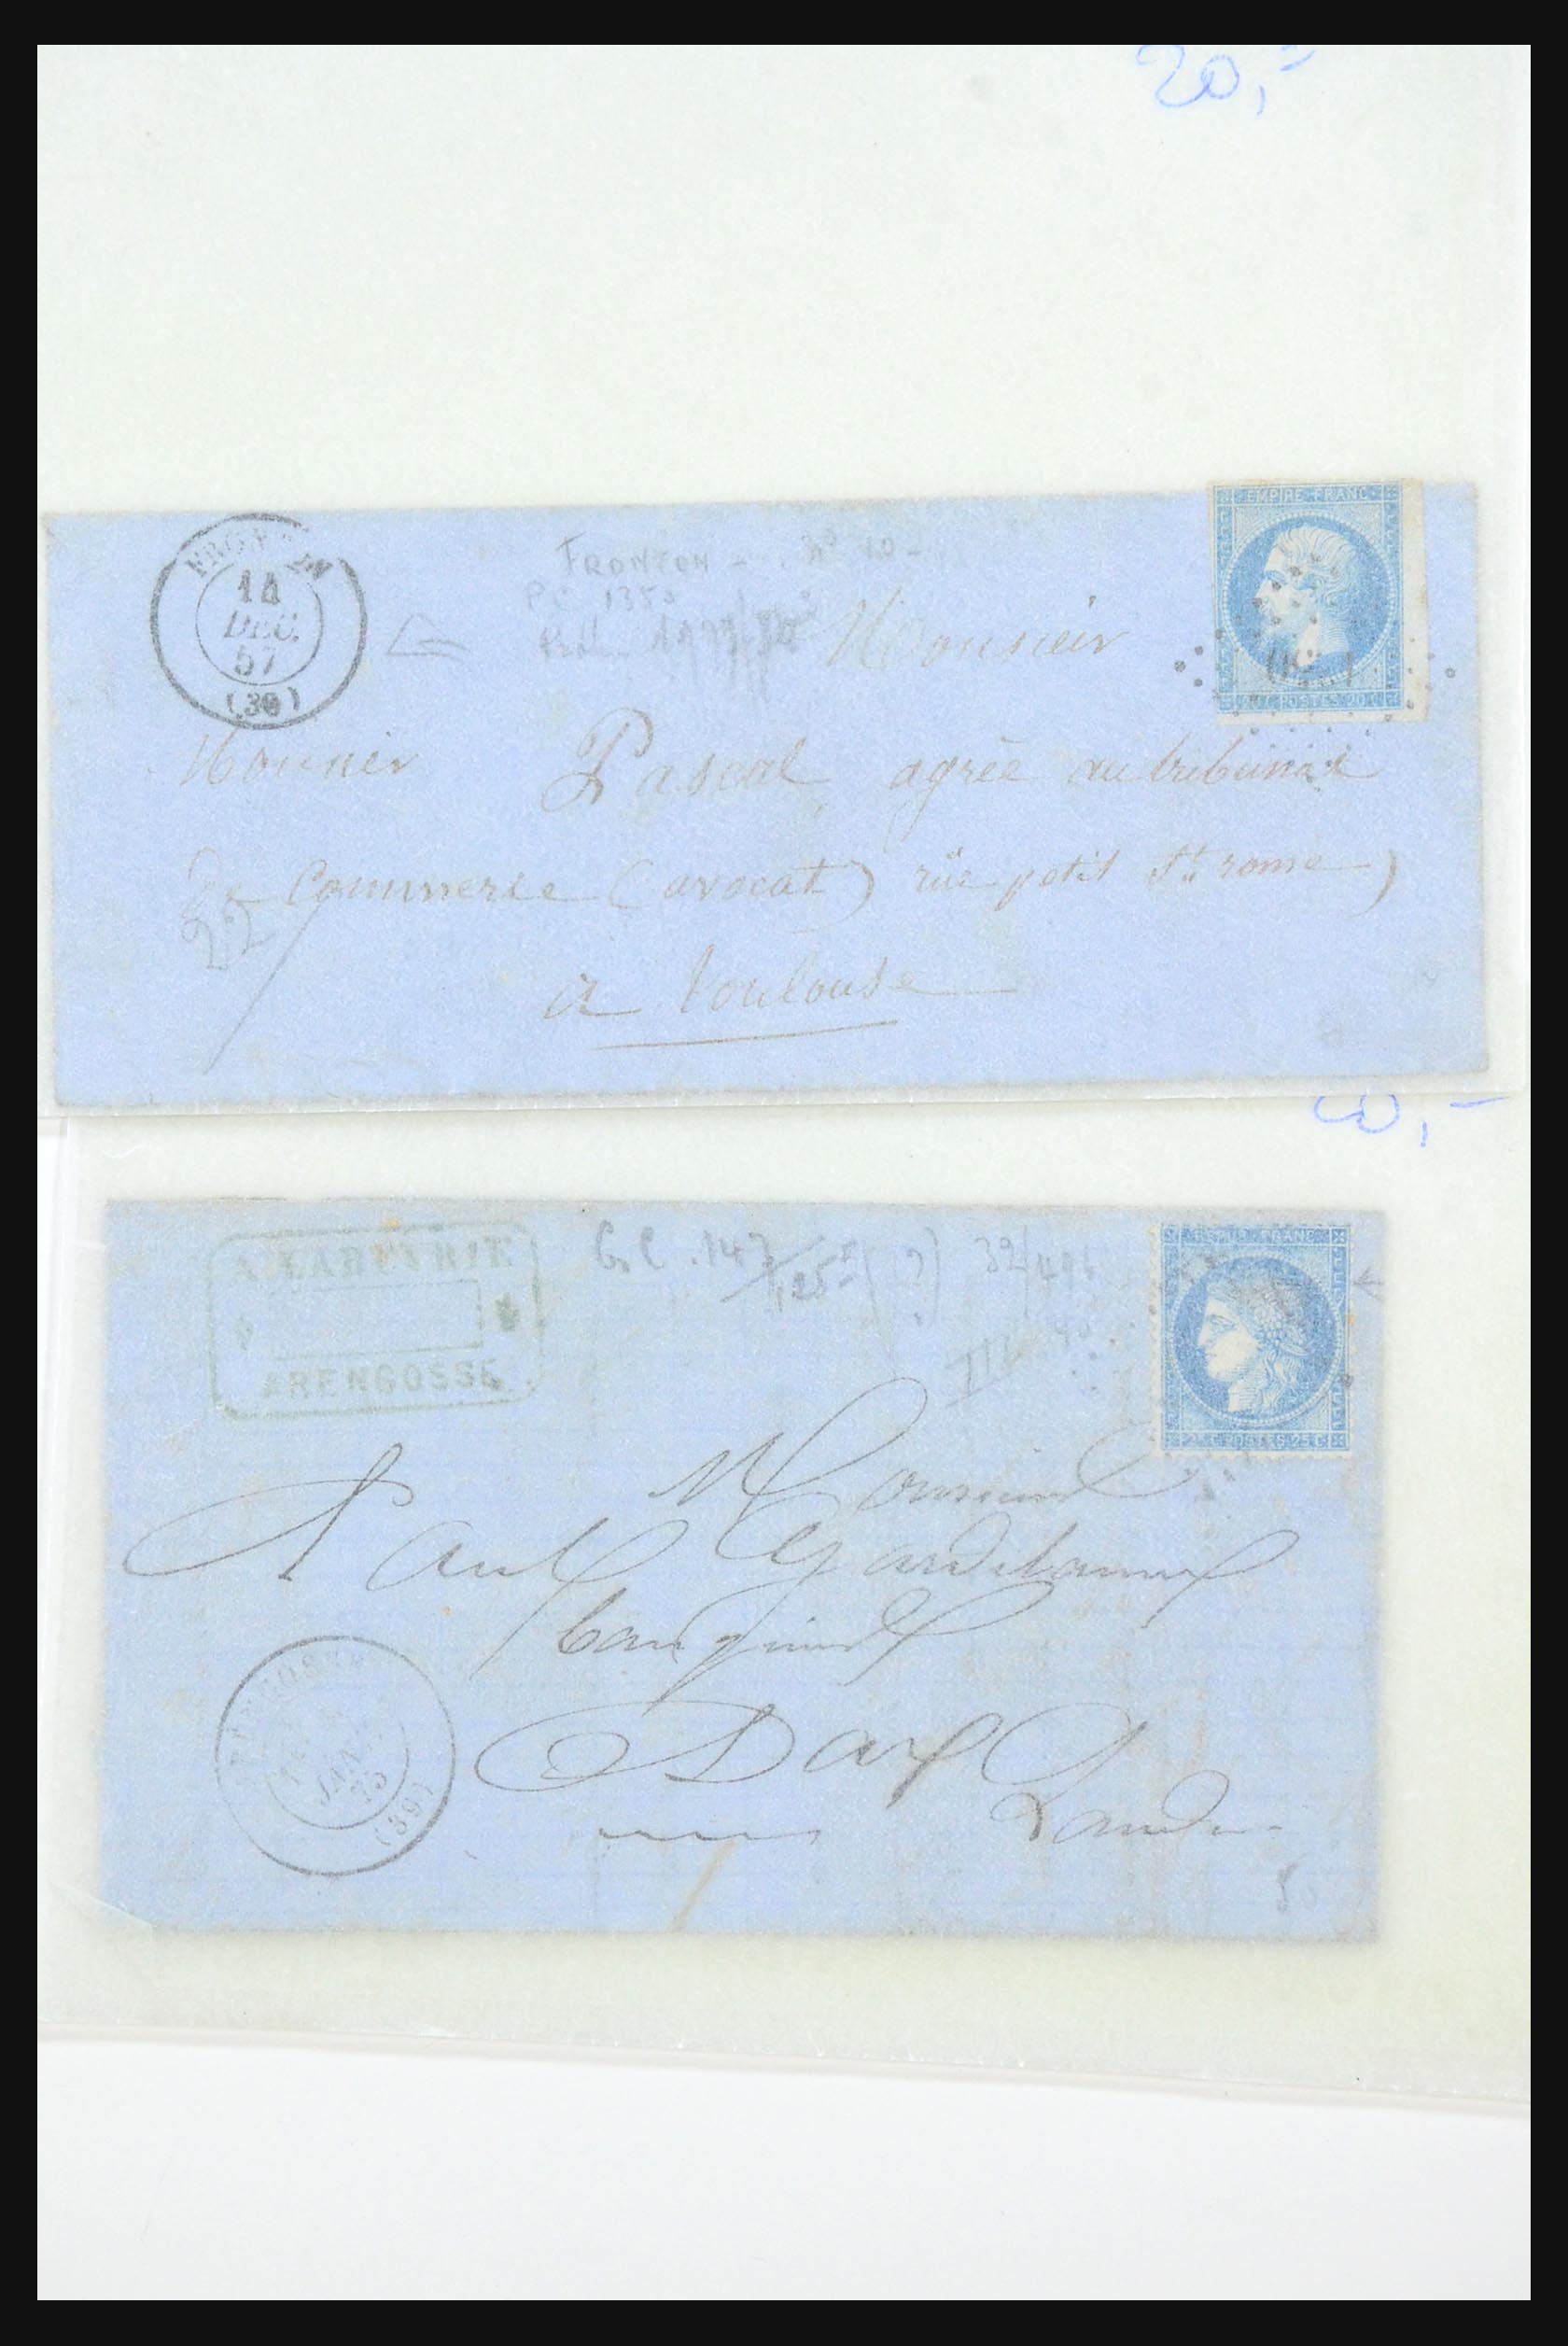 31359 0028 - 31359 France and Colonies covers 1770-1960.